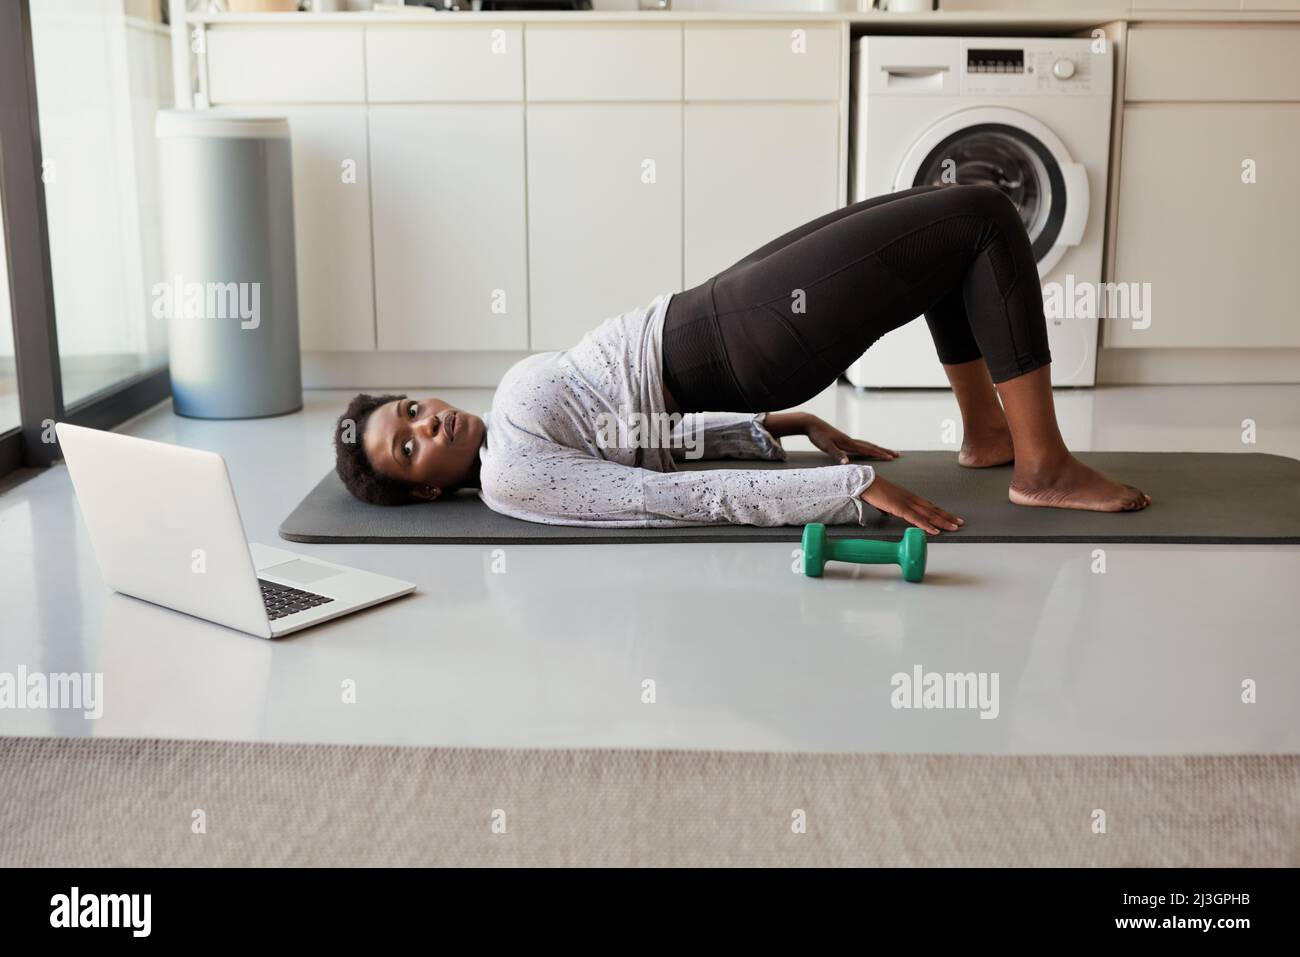 Becoming fit all in the privacy of her home. Shot of a young woman using a laptop while exercising at home. Stock Photo